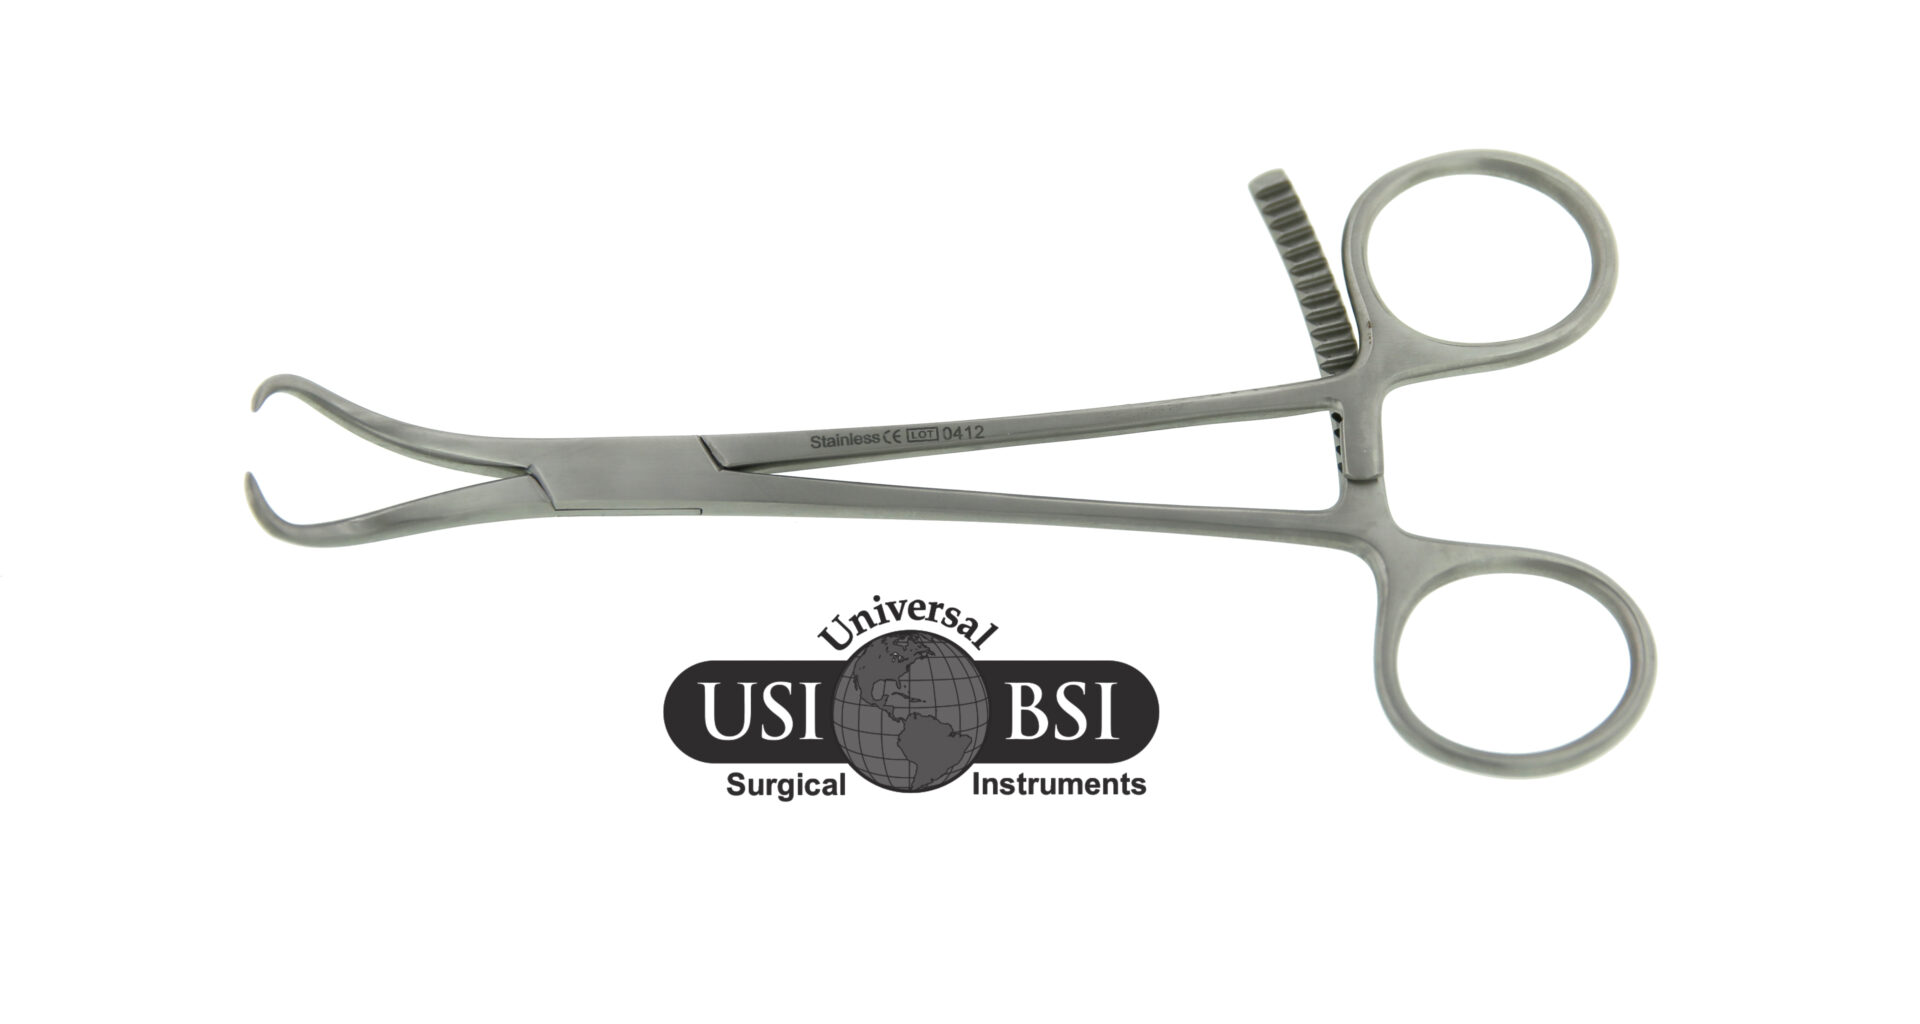 A pair of scissors with the us surgical instruments logo on top.